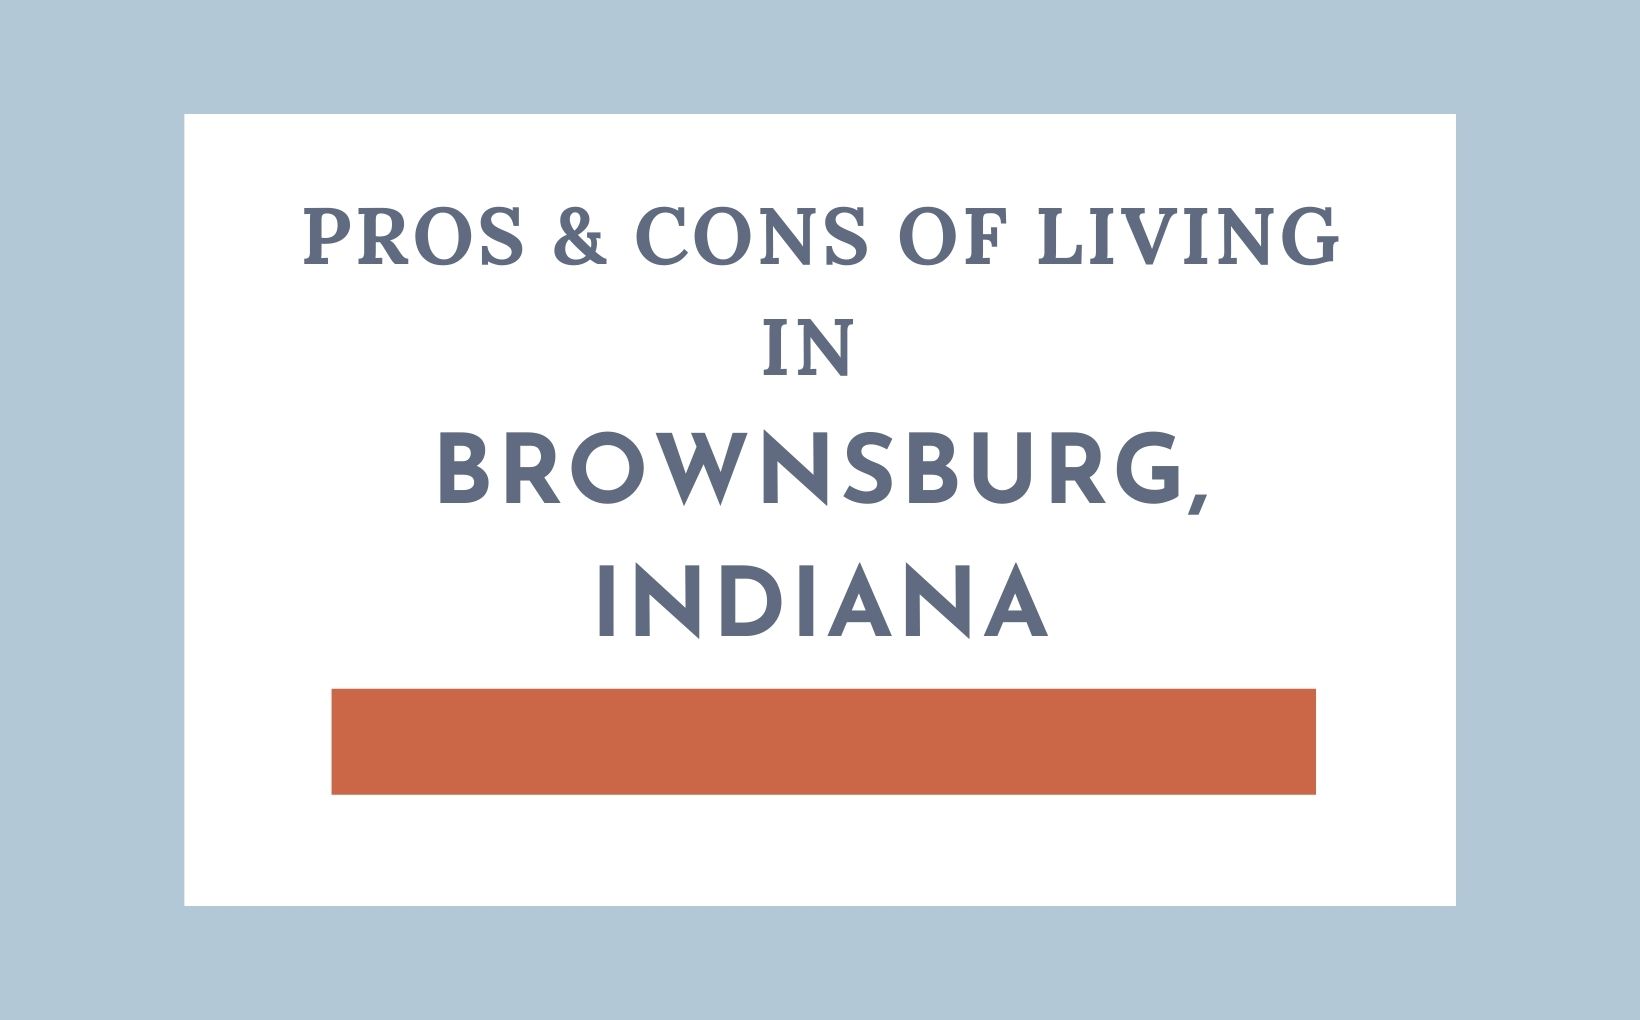 Pros & Cons of Living in Brownsburg Indiana feature image